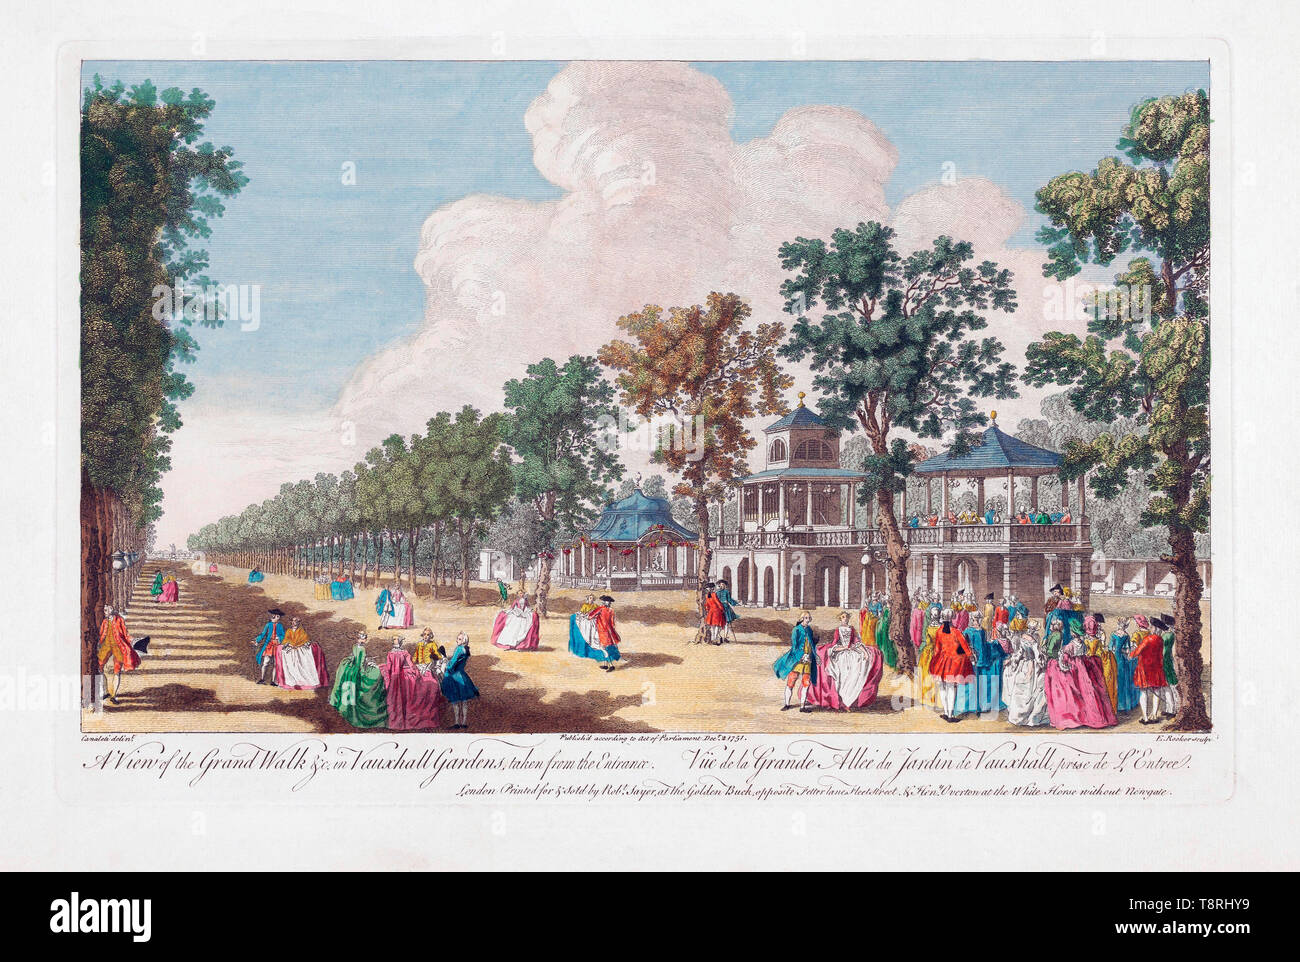 A View of the Grand Walk in Vauxhall Gardens taken from the Entrance.  London, England.  After a hand-coloured engraving by Edward Rooker from a work by Canaletto.  Dated 1751. Stock Photo